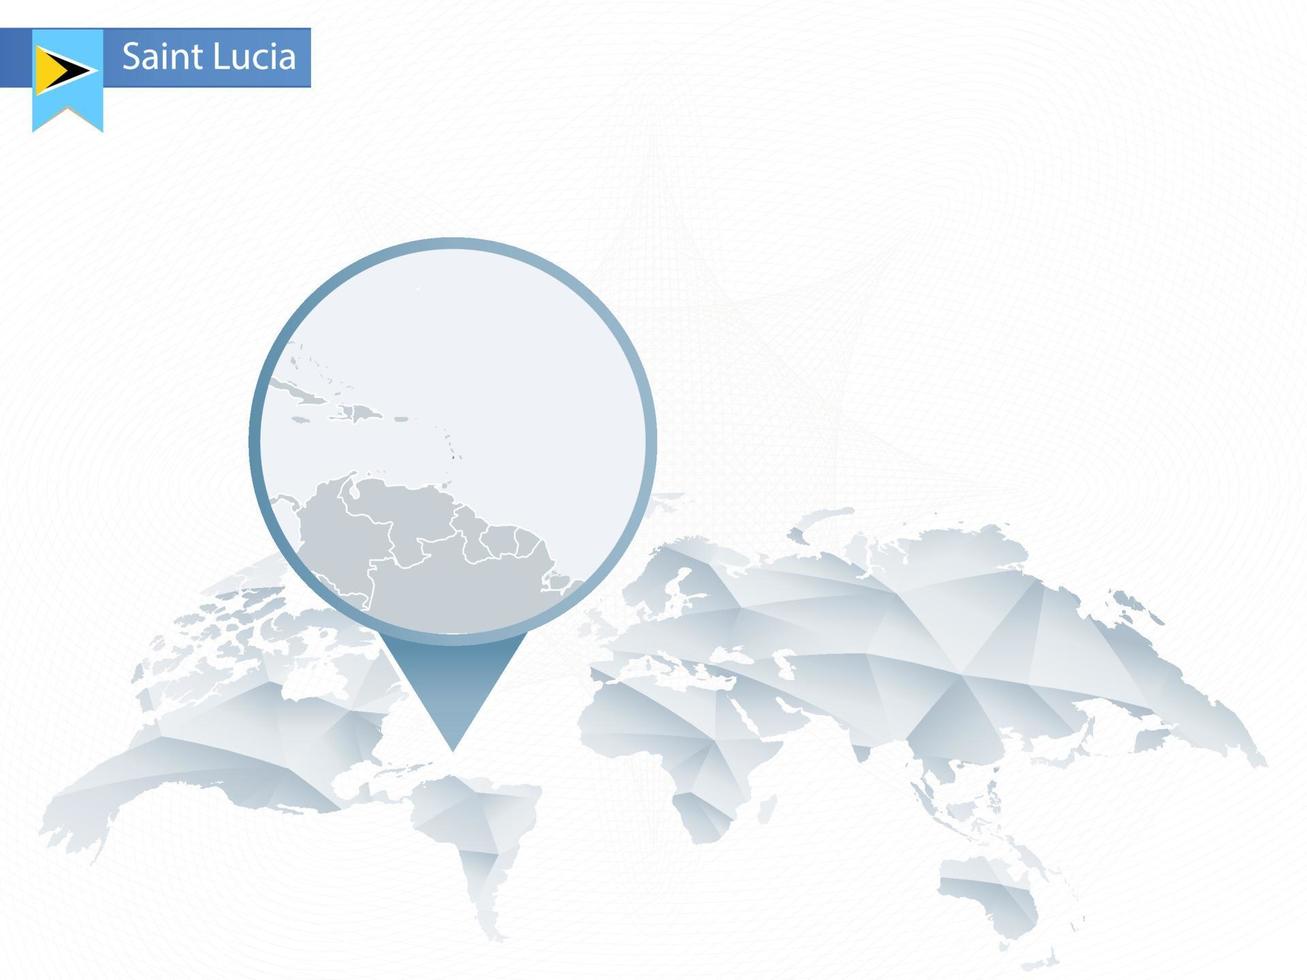 Abstract rounded World Map with pinned detailed Saint Lucia map. vector